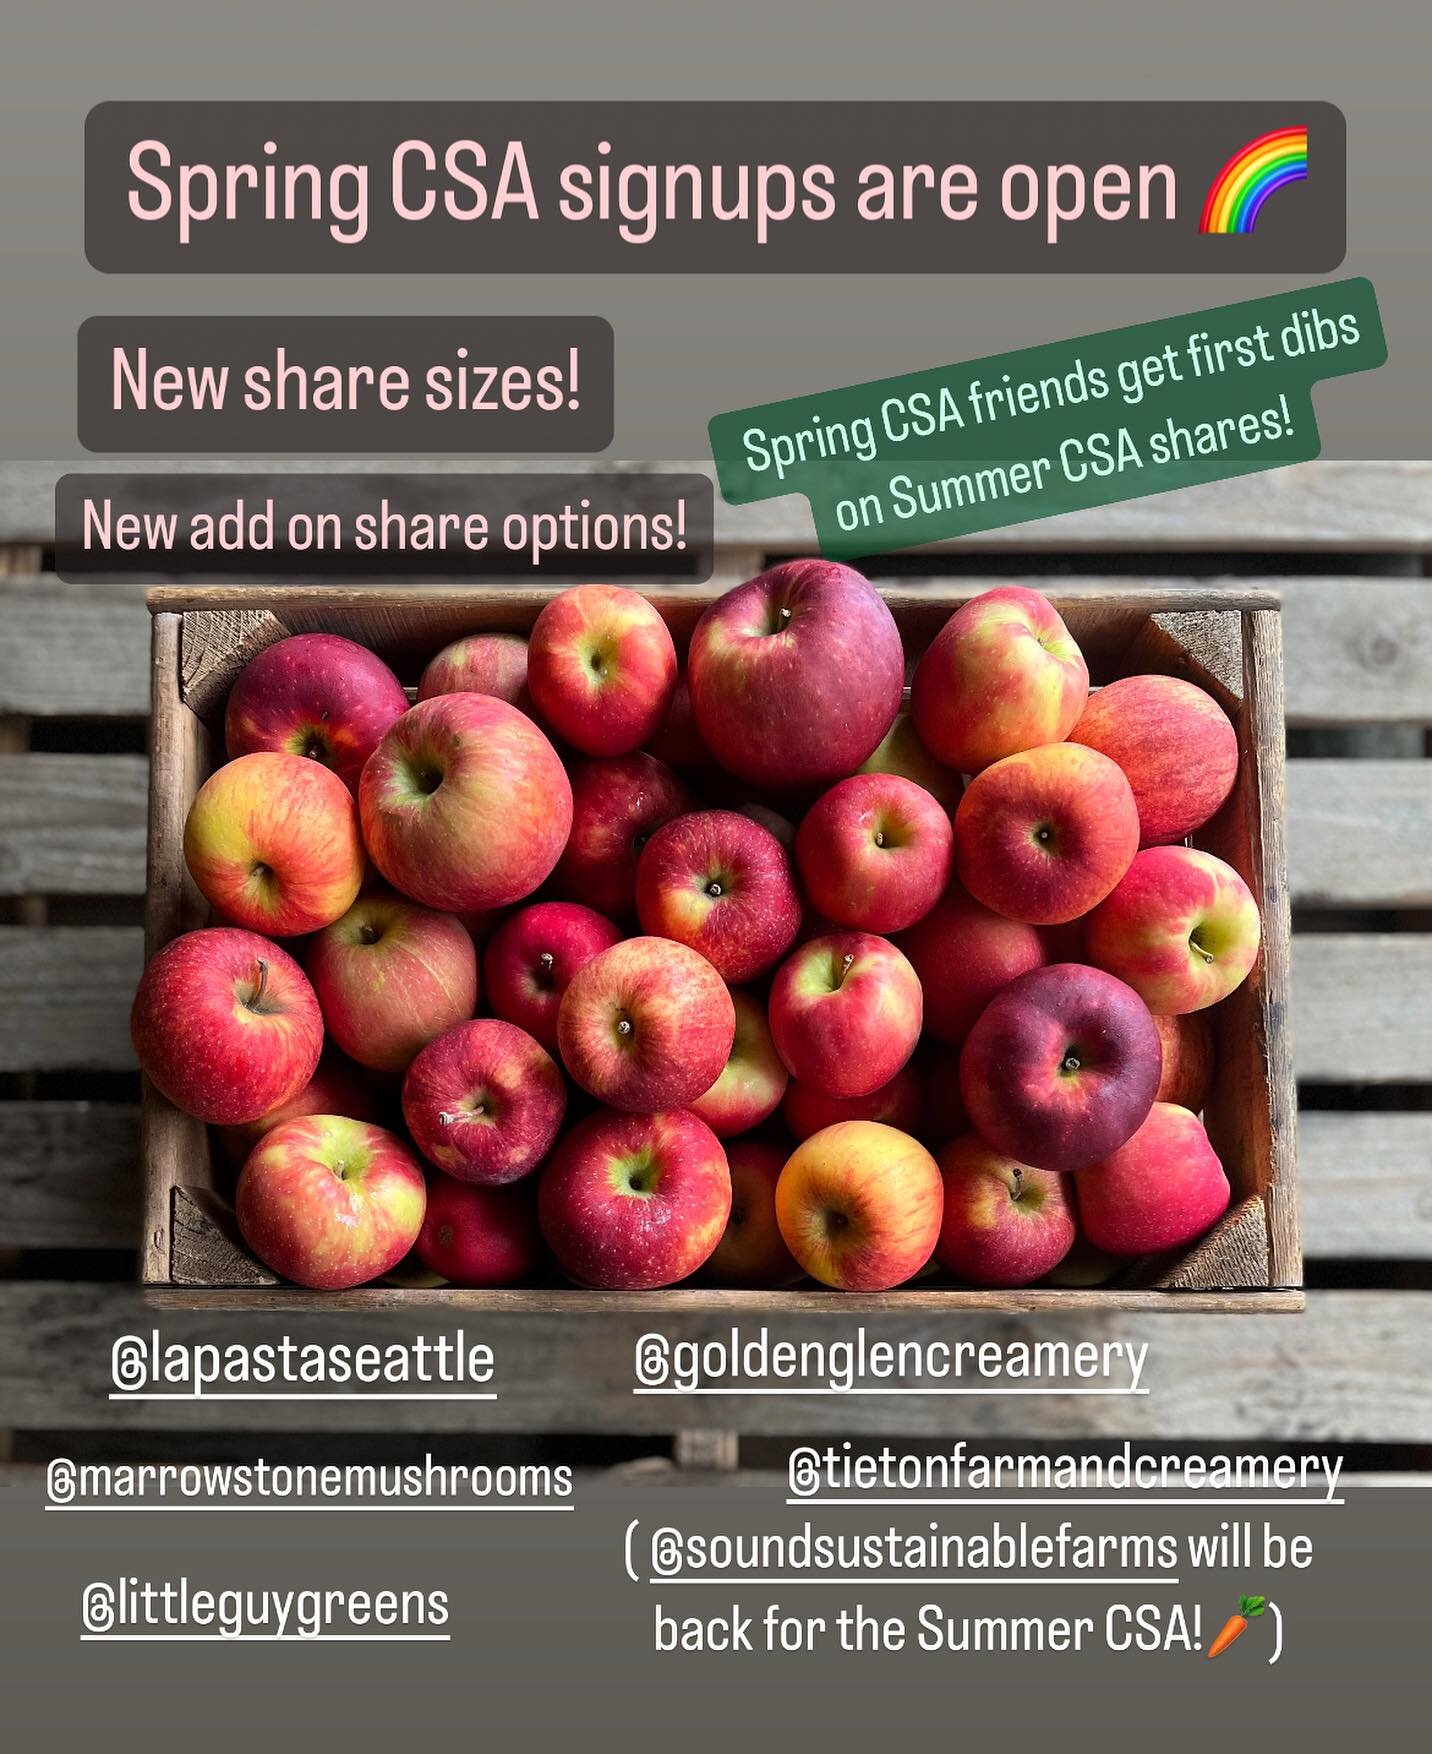 You can now join our short &amp; sweet, all apple Spring CSA season!

This 6 week season has our *new* Mini CSA Share and our *new* Mushroom Add-On Share by @marrowstonemushrooms !

Spring CSA friends will get first dibs on Summer CSA share choices! 